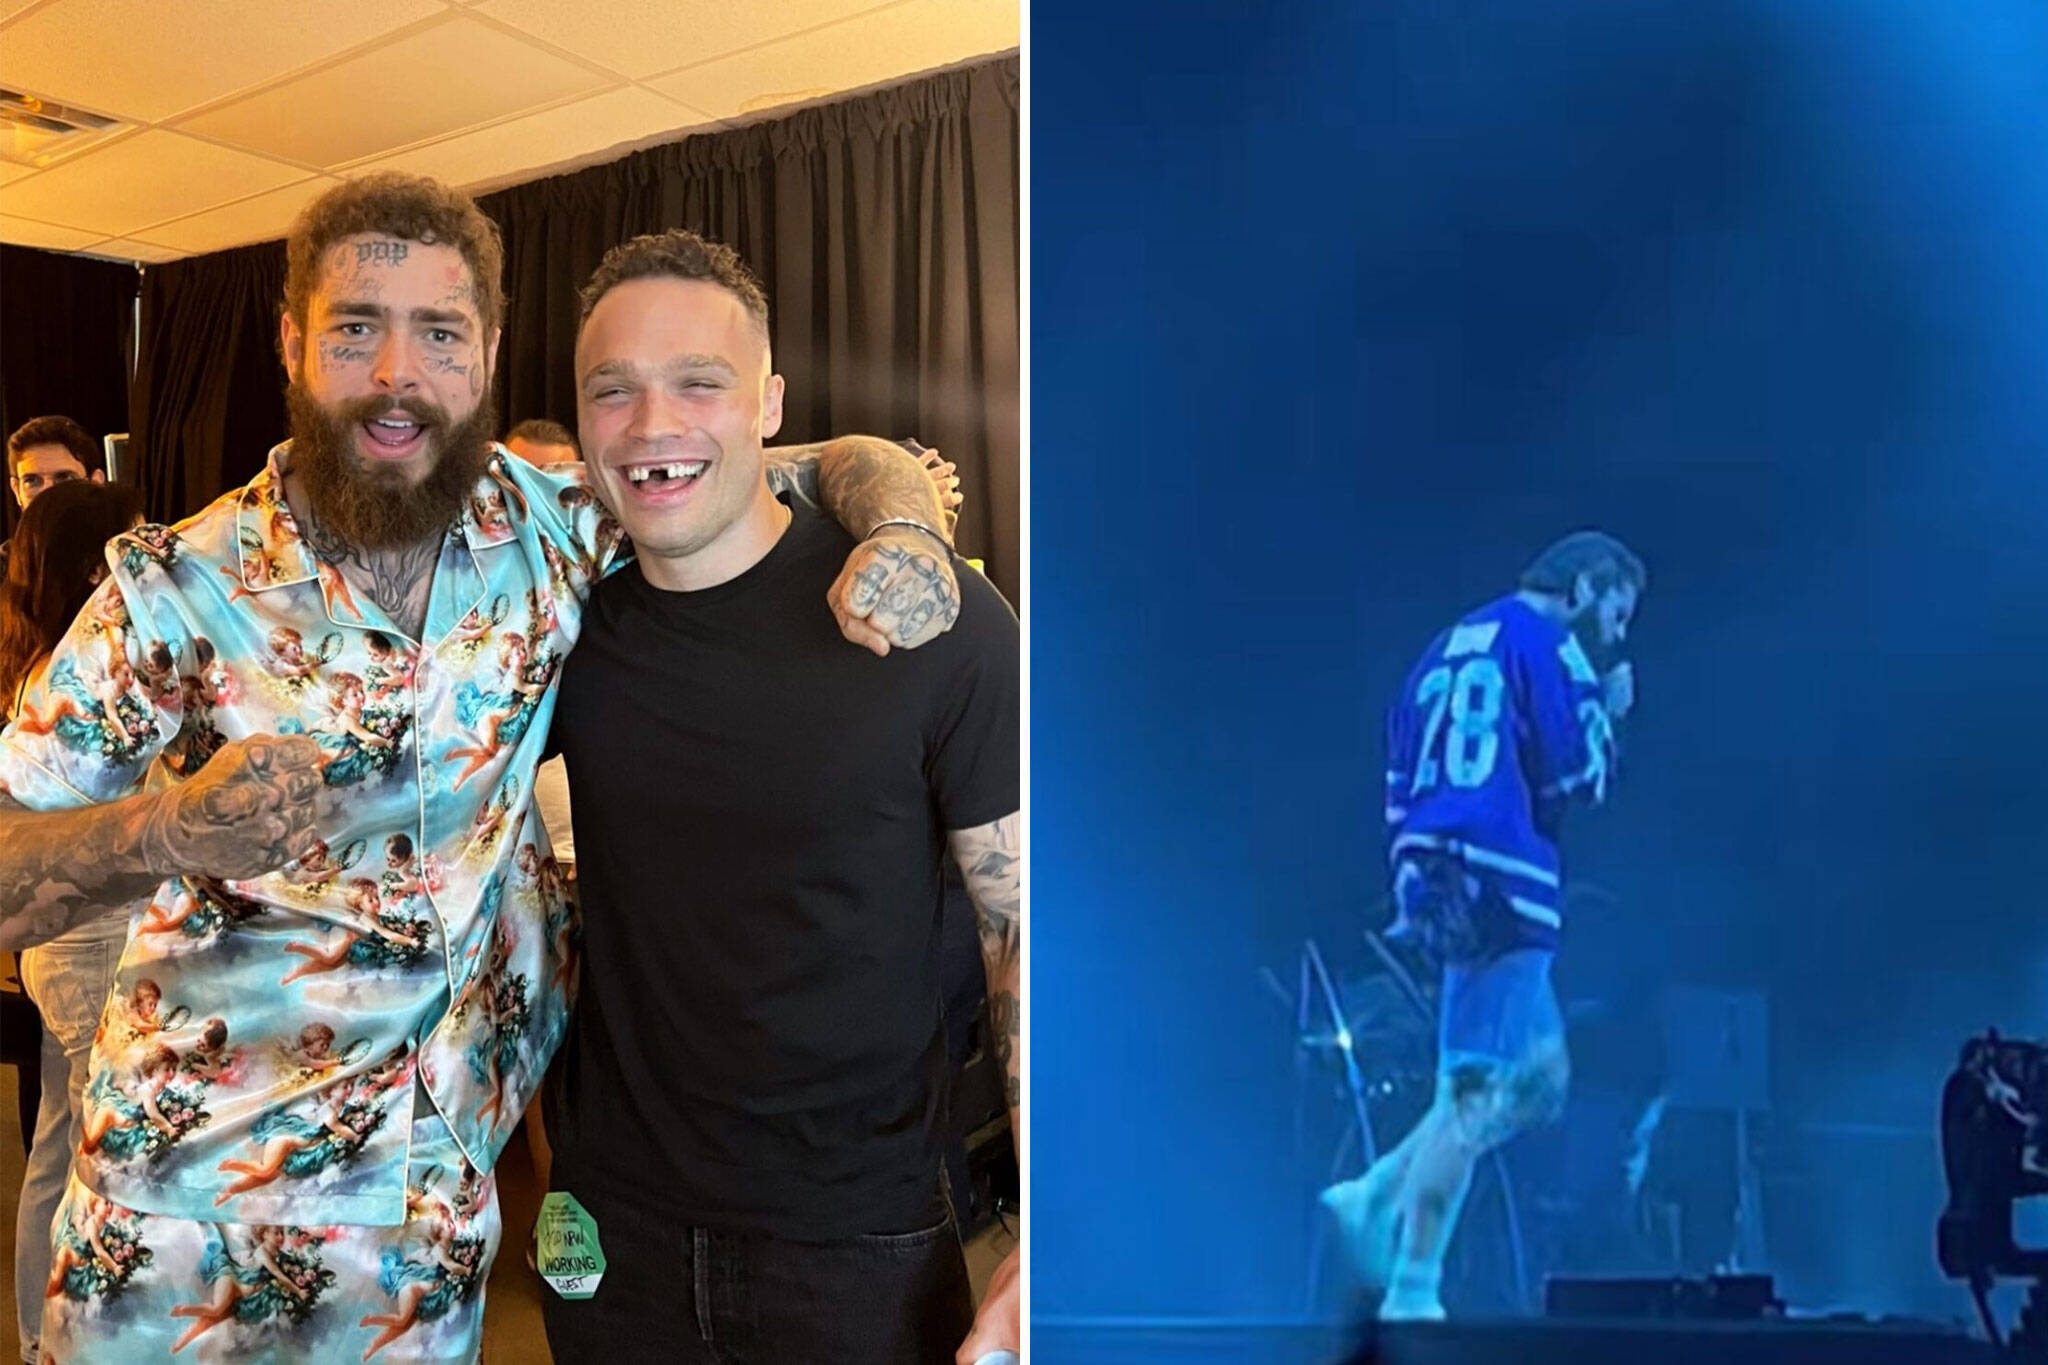 Post Malone Wears Tie Domi Maple Leafs Jersey at Toronto Show - BVM Sports